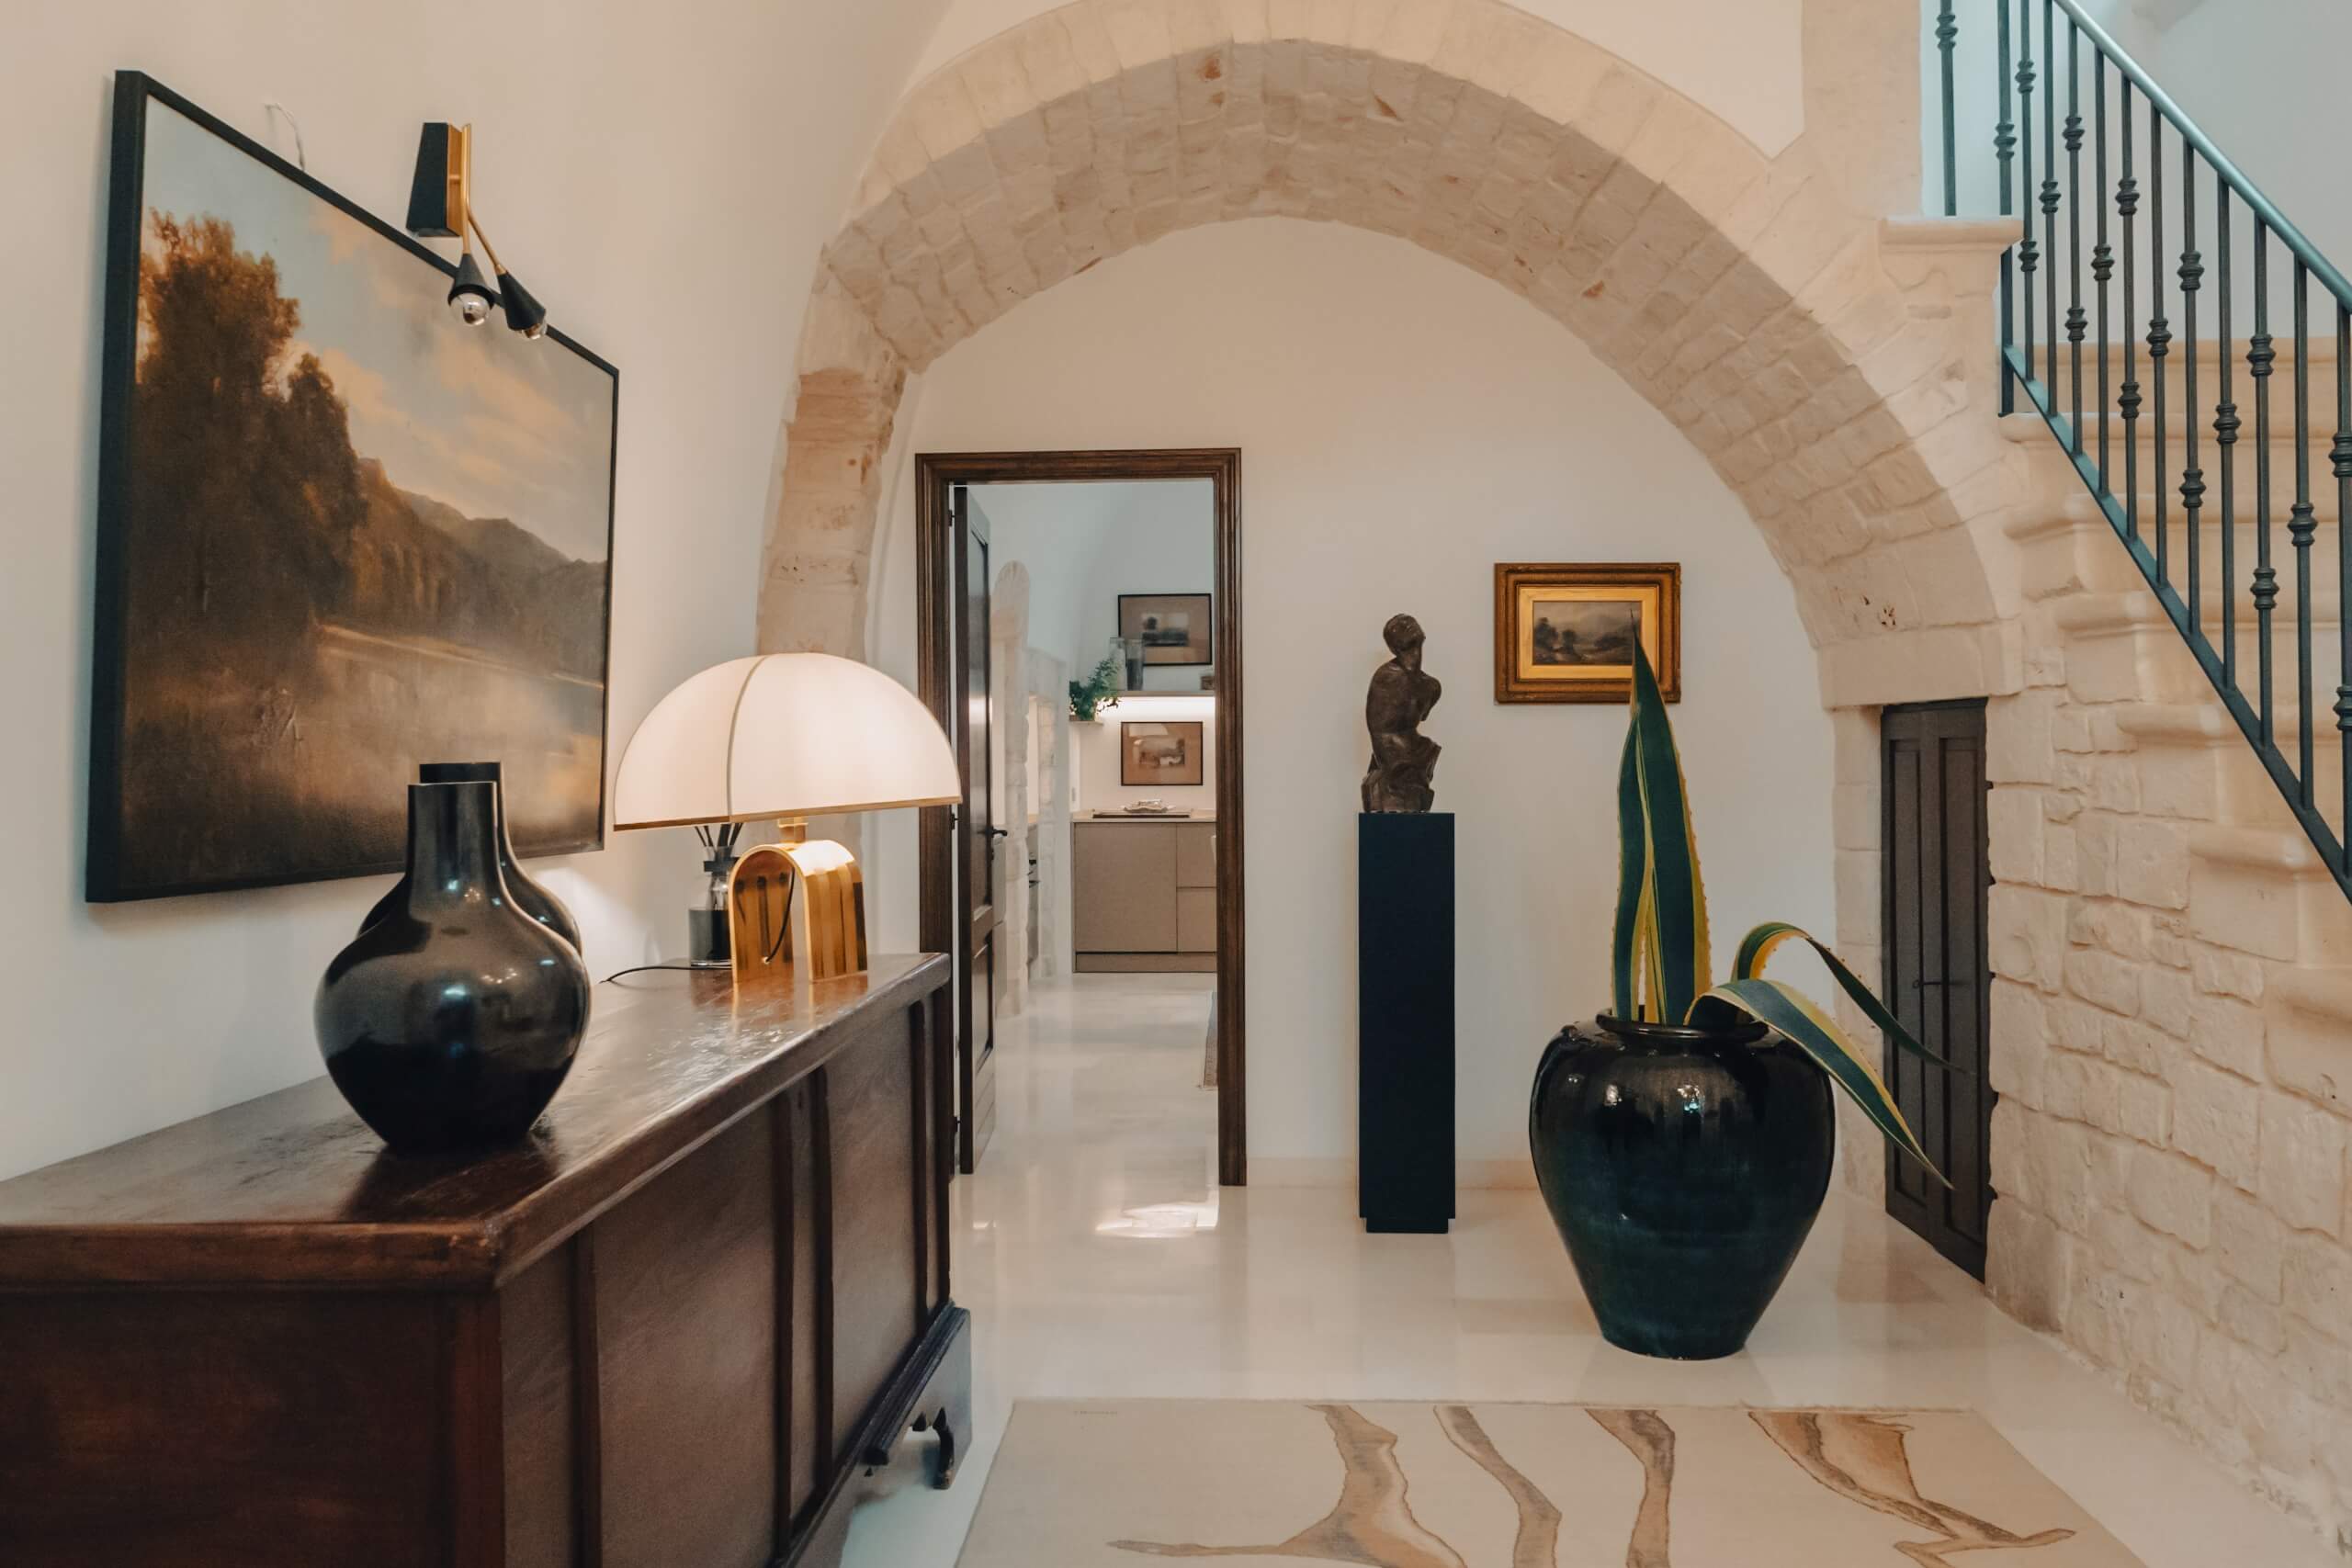 You have just walked in your Apulian home.